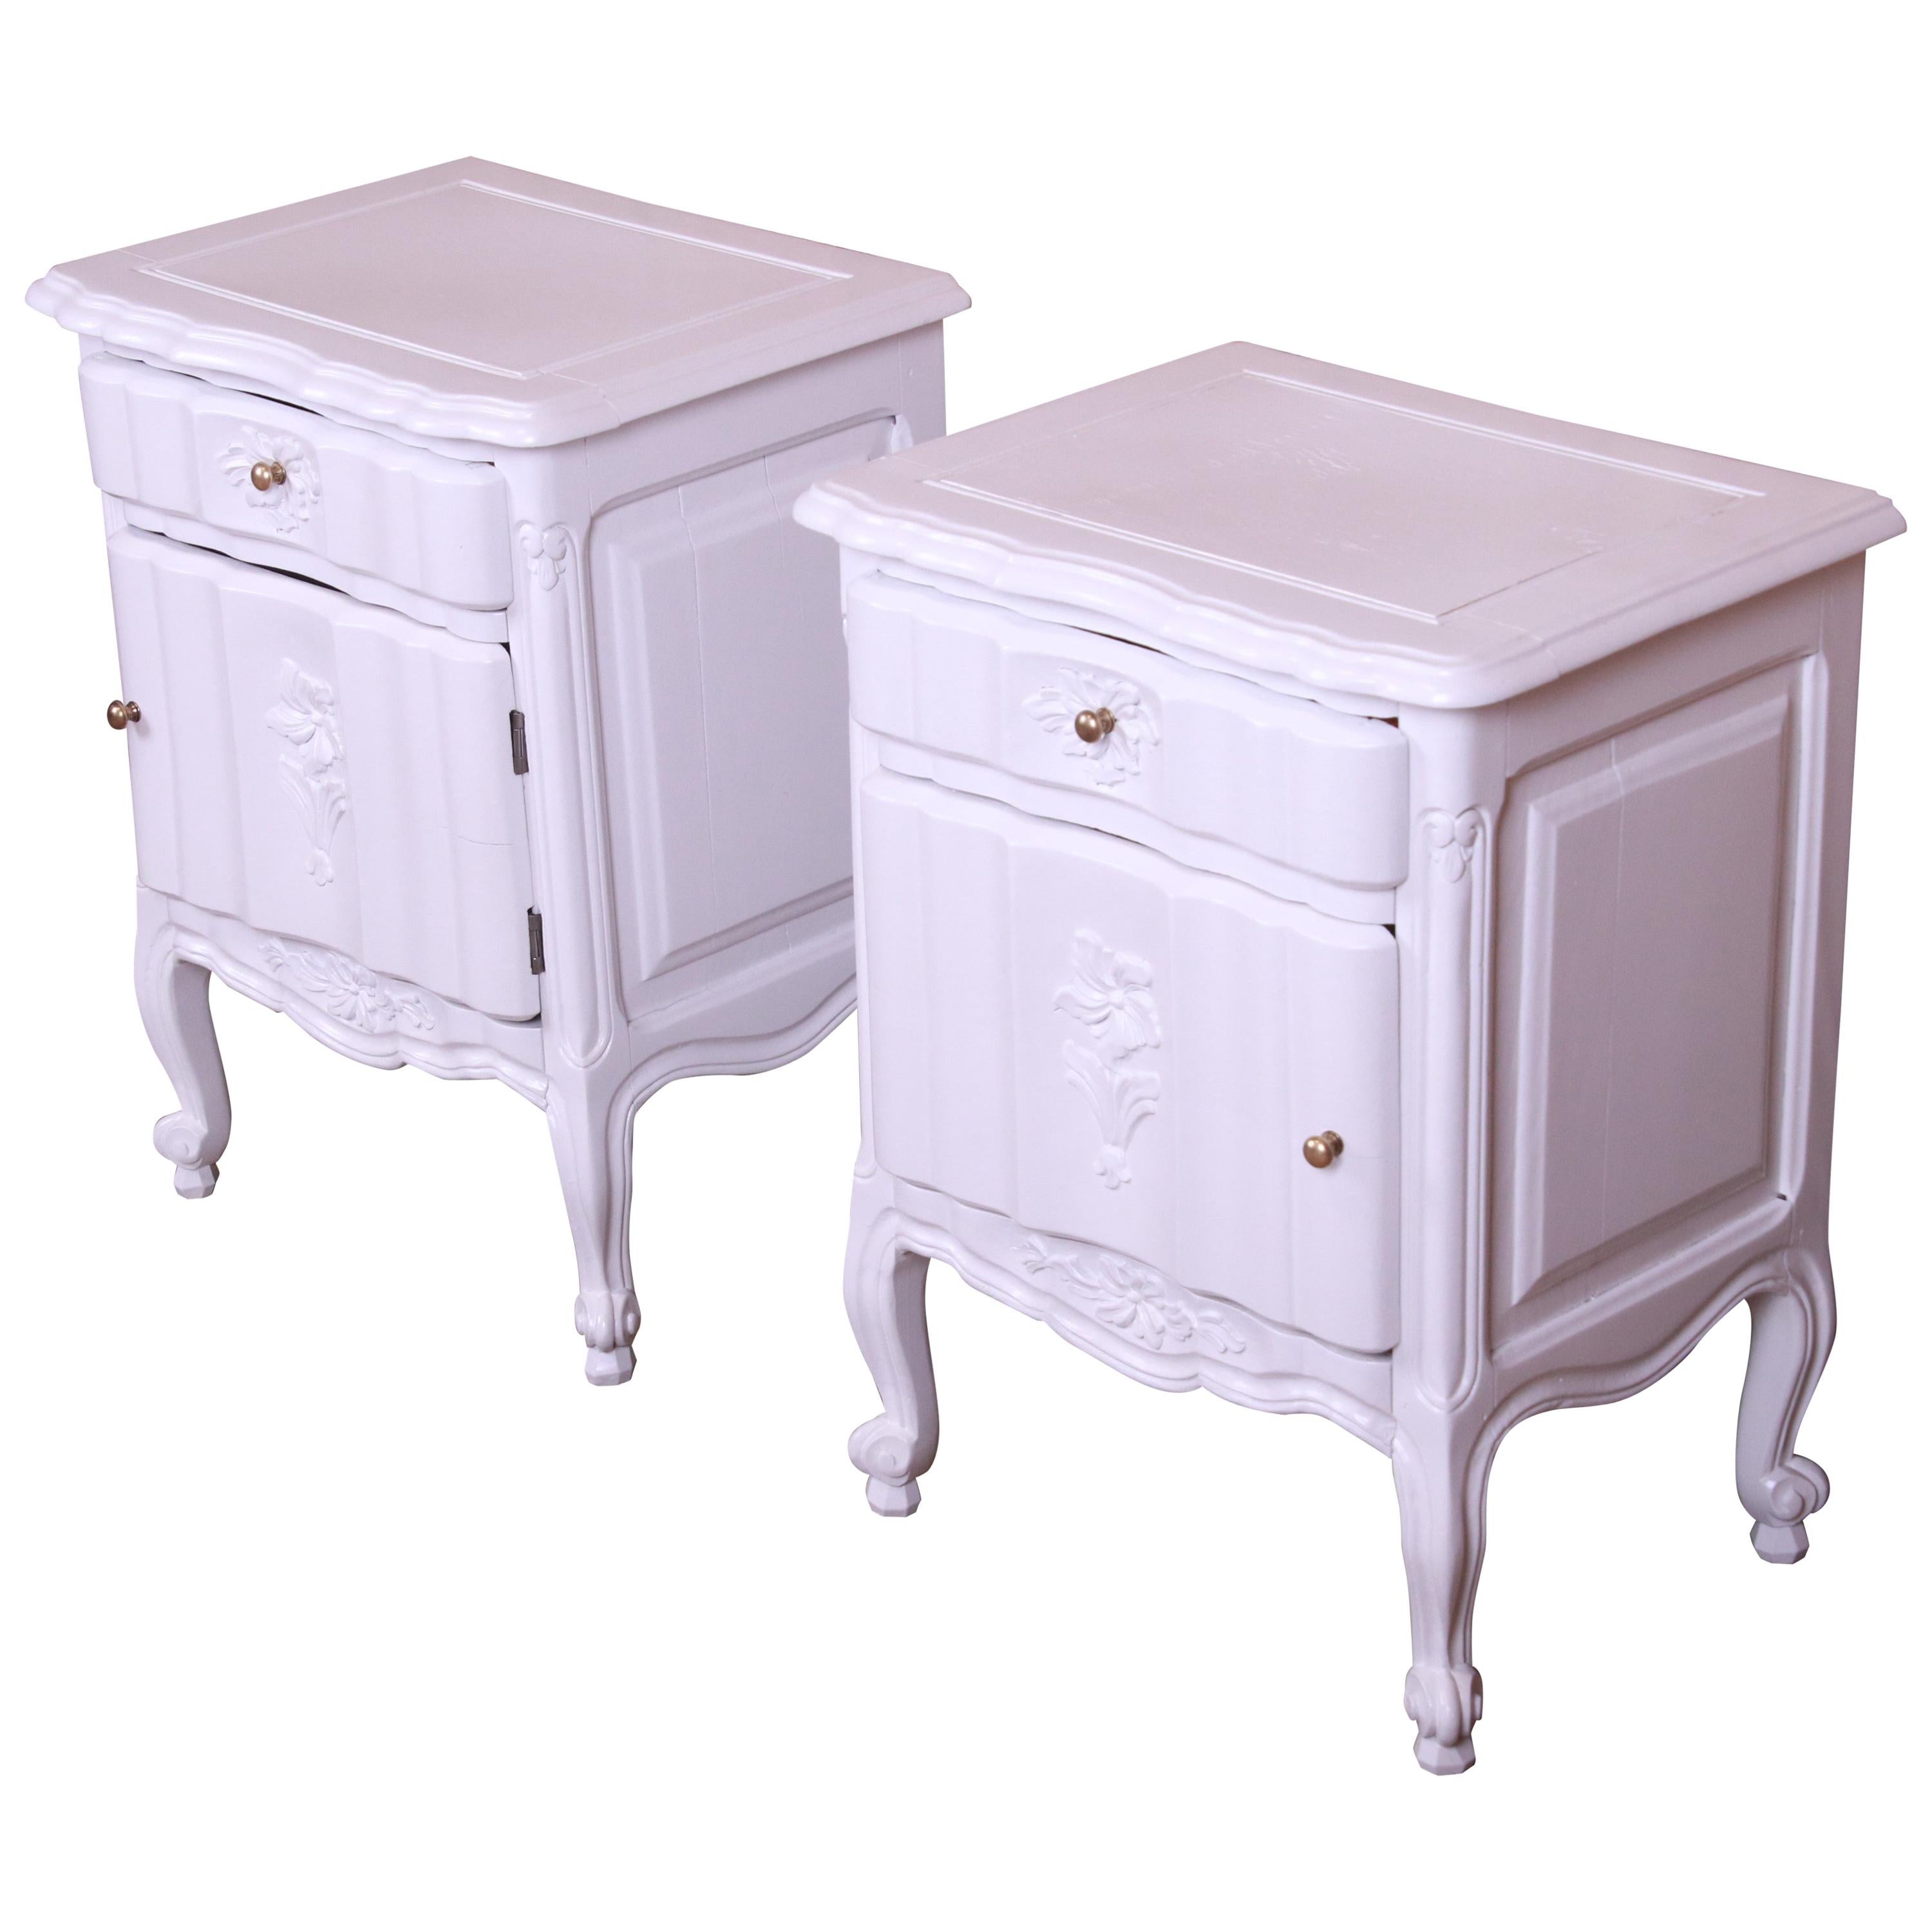 Antique French Provincial Louis XV White Lacquered Nightstands, Newly Refinished